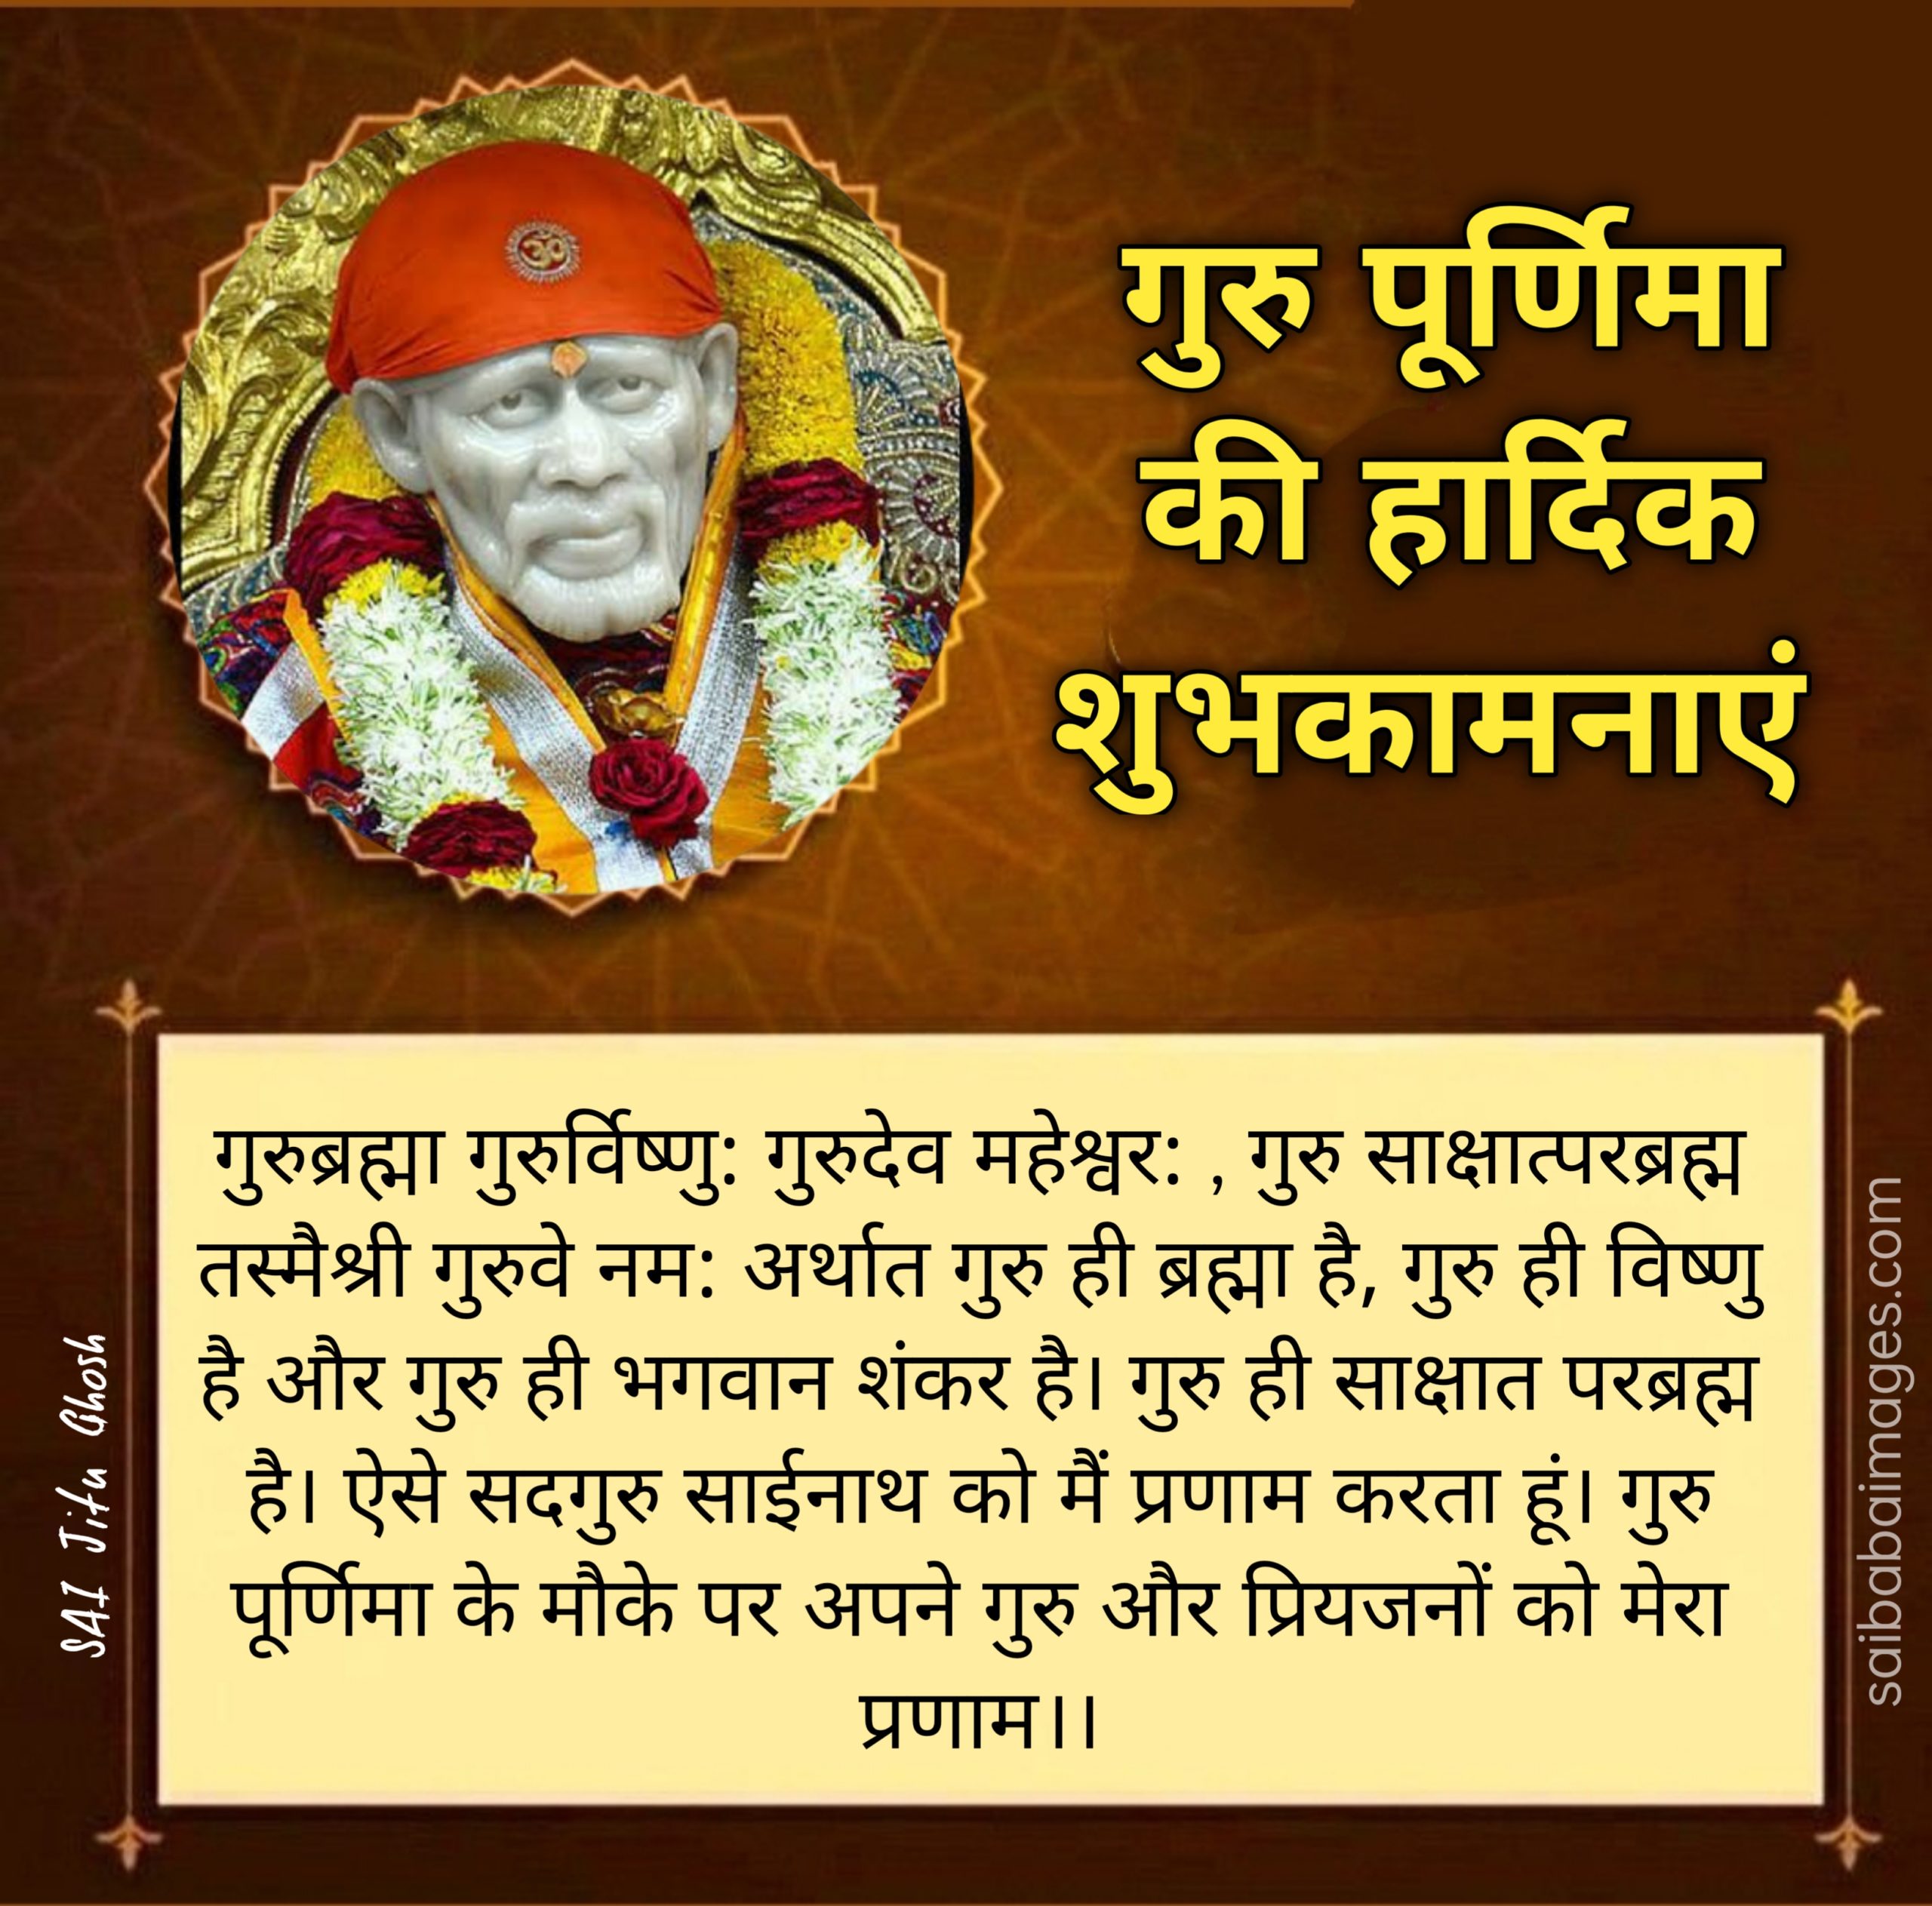 Gurupoornima Messages Wishes Greetings - Sai Baba Images with Quotes & HD  Wallpaper For Mobile & Desktop